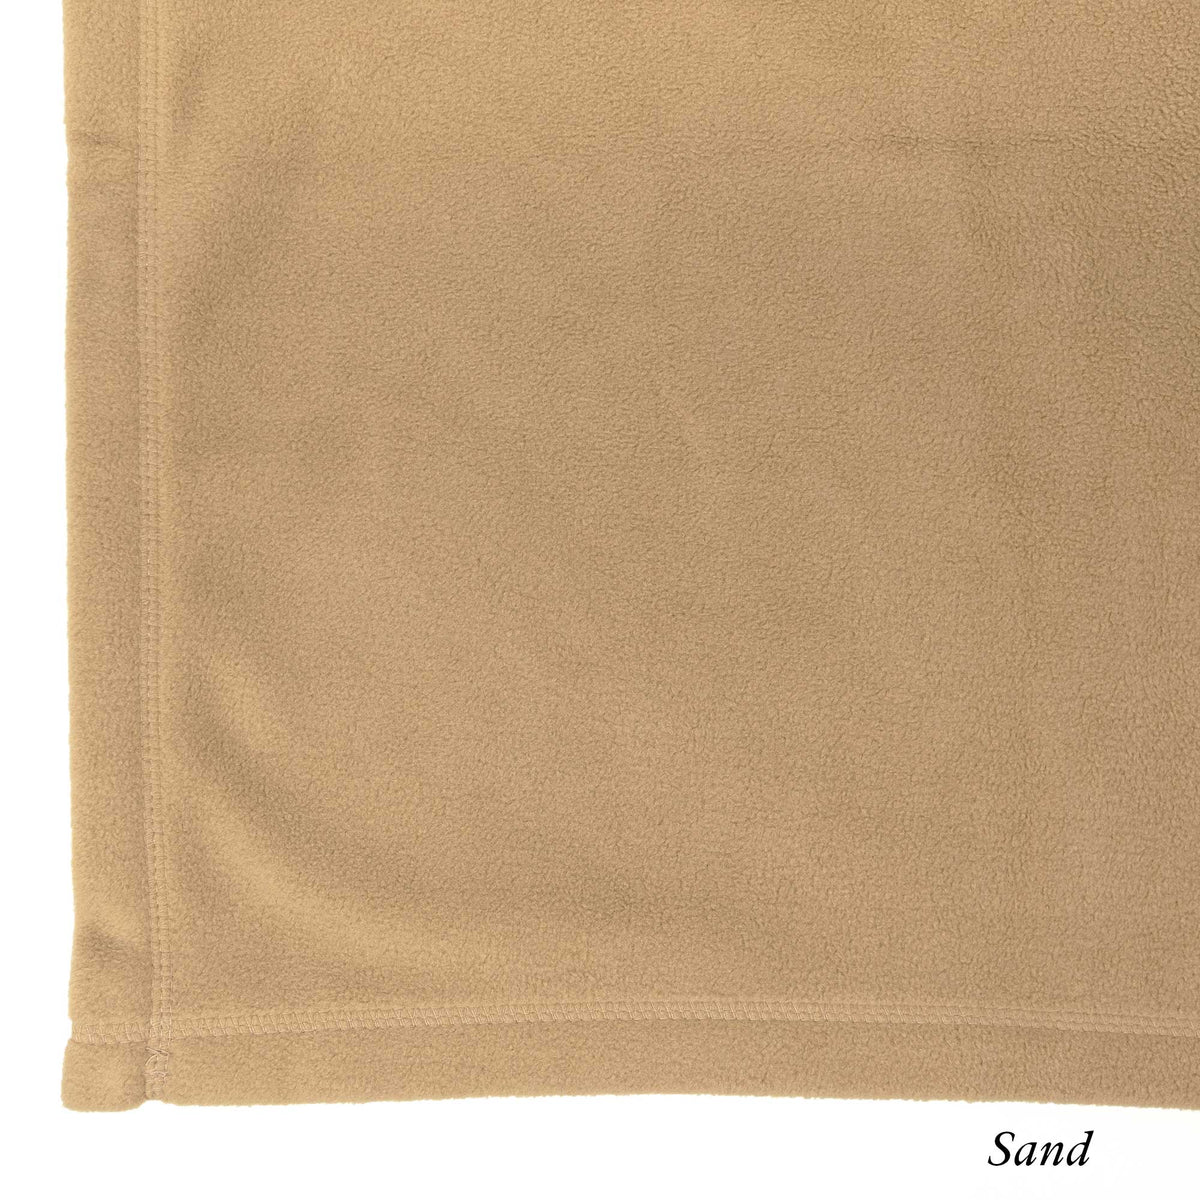 Corporate Gift - Peaceful Touch Fleece Throws